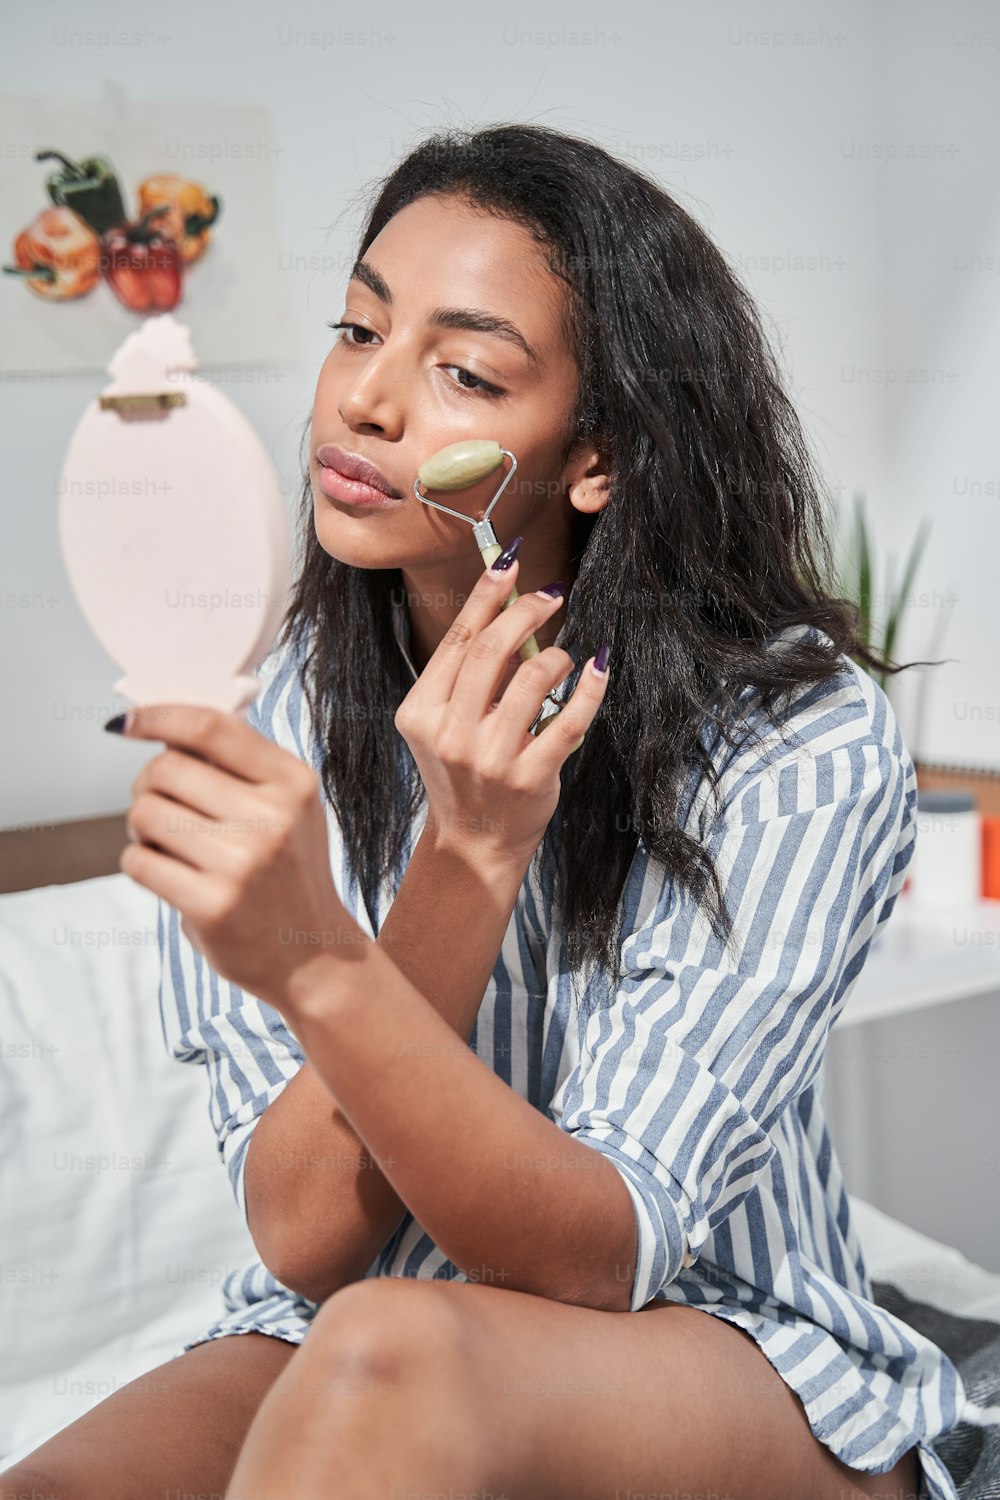 Young brunette woman is holding hand mirror and looking at her reflection with pleasure smile while using jade roller on cheeks at the bedroom. Concept of beauty, self-care, cosmetics